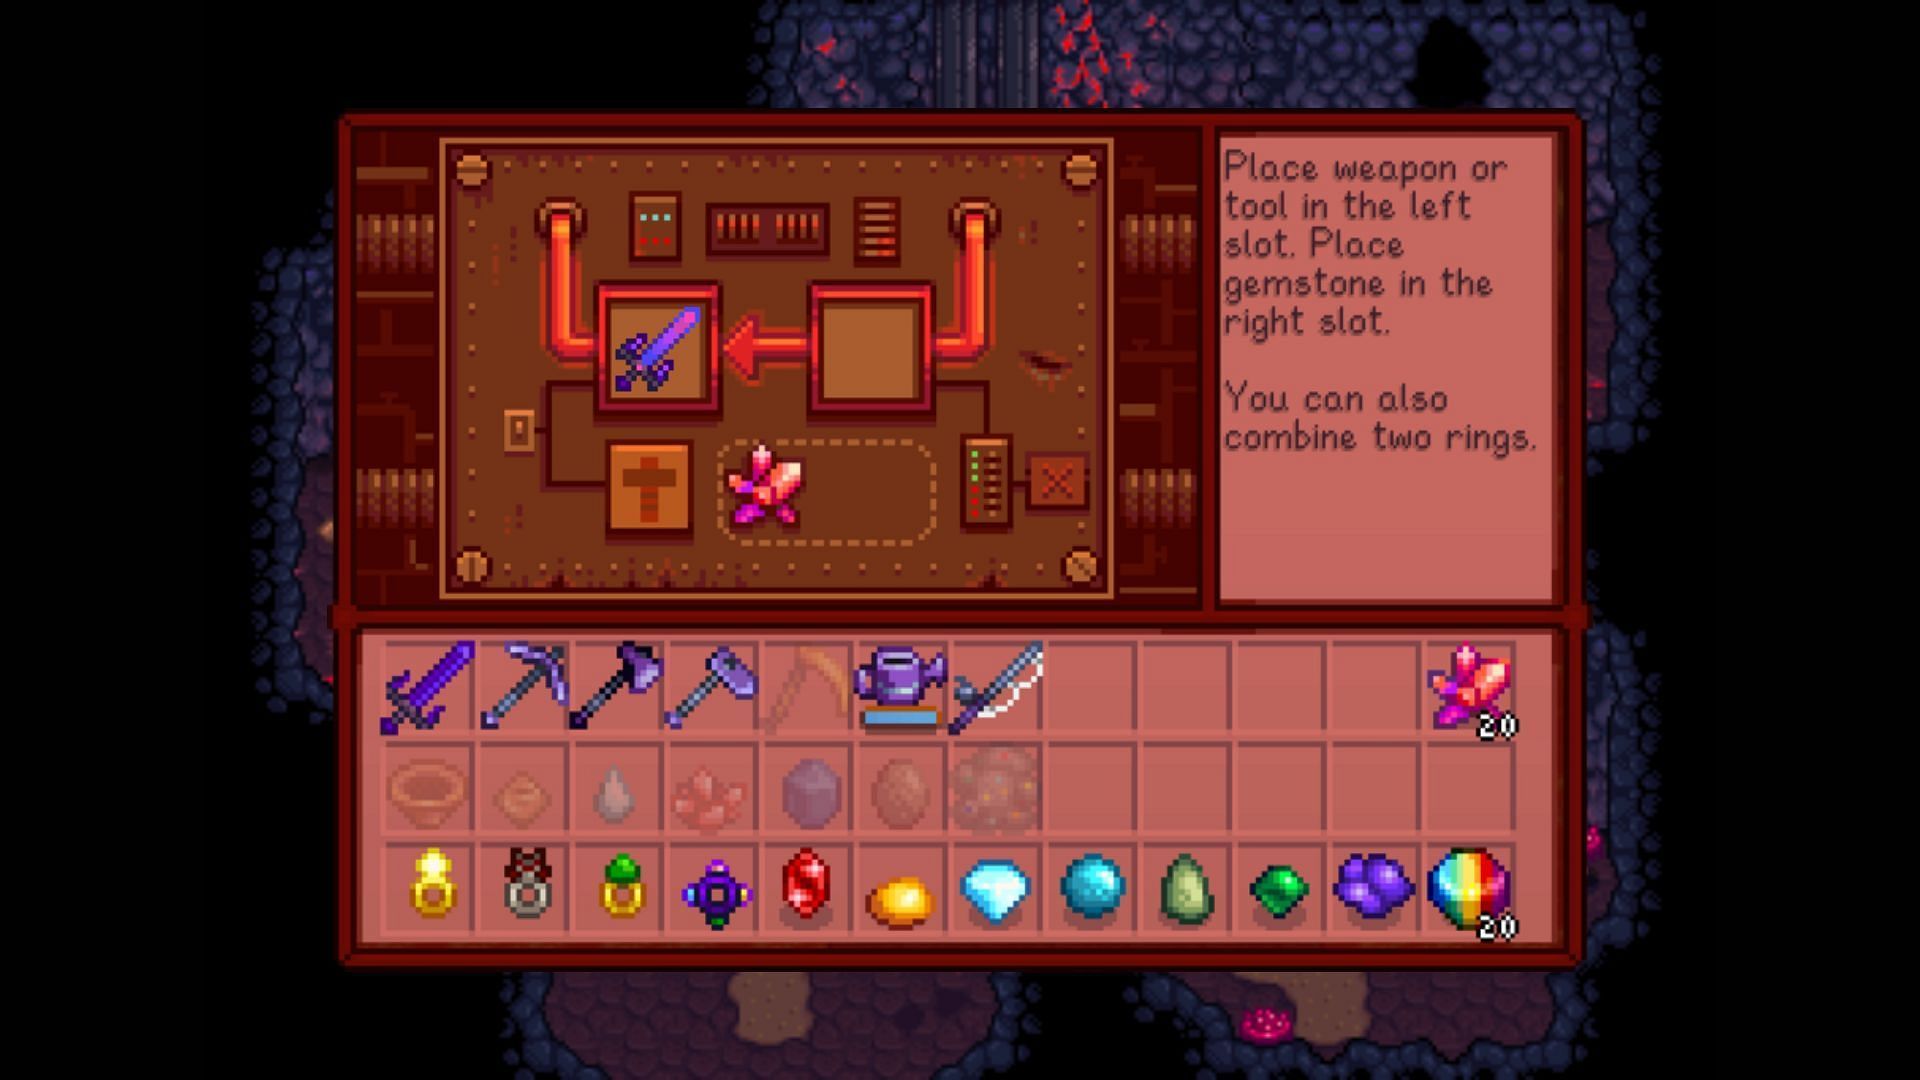 Stardew Valley Weapons can be upgraded by using Cinder Shards and Gems. (Image via ConcernedApe)